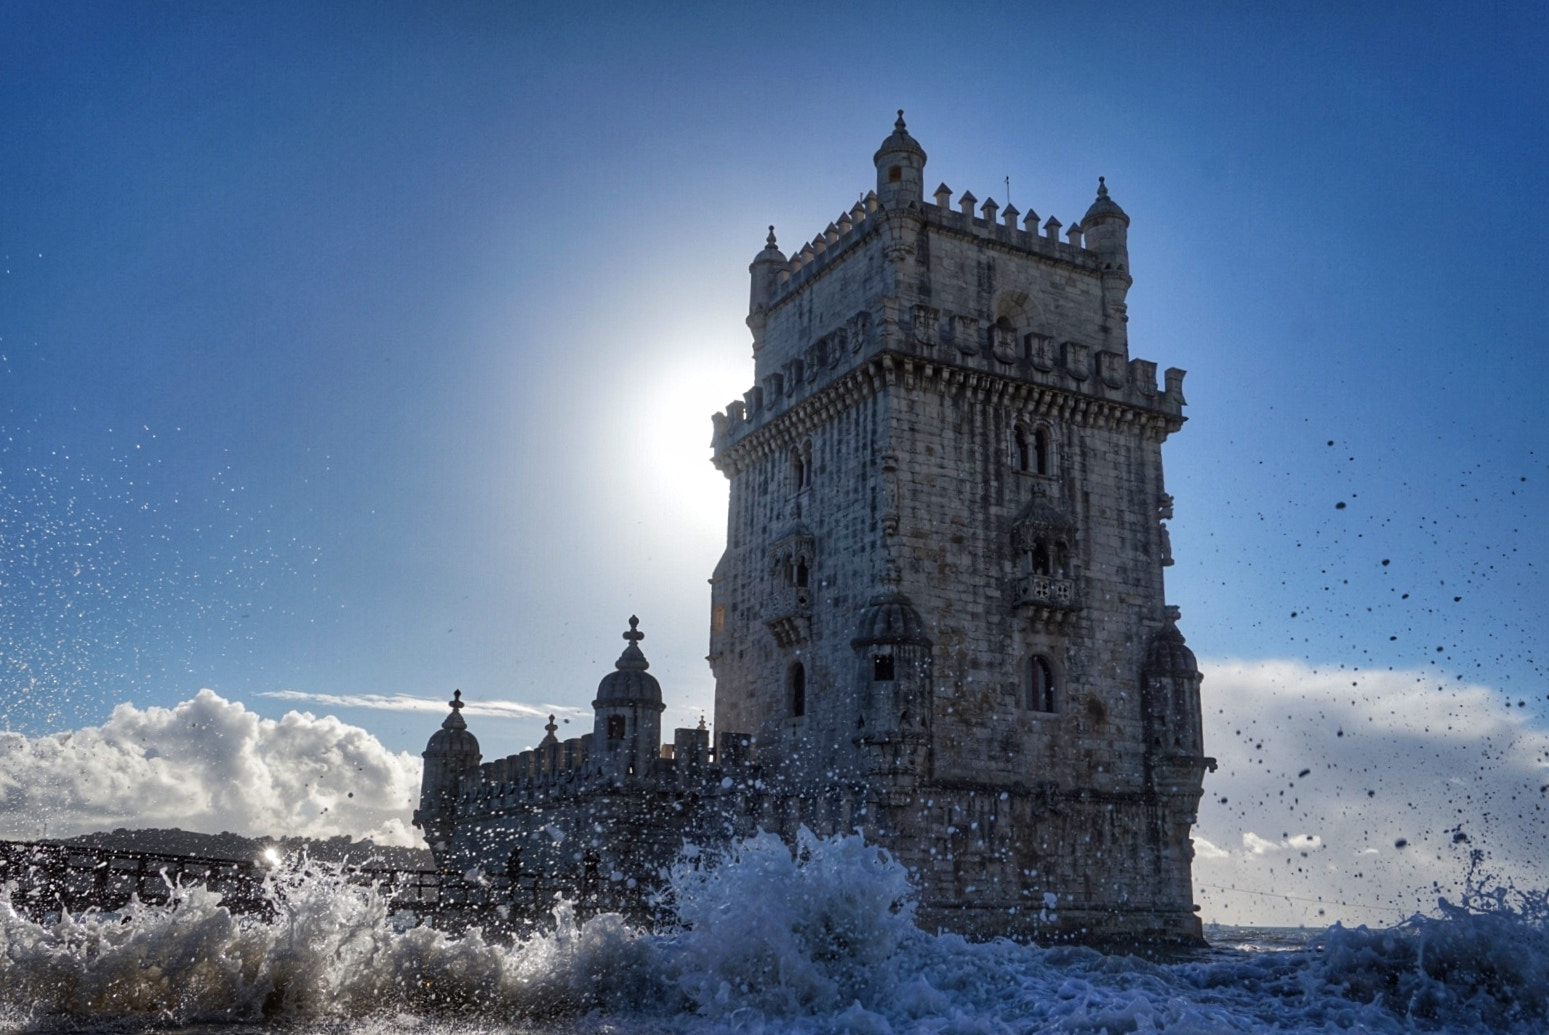 Sony Alpha QX1 sample photo. Belem lisbon spain tower, surrounded by the sea, t ... photography